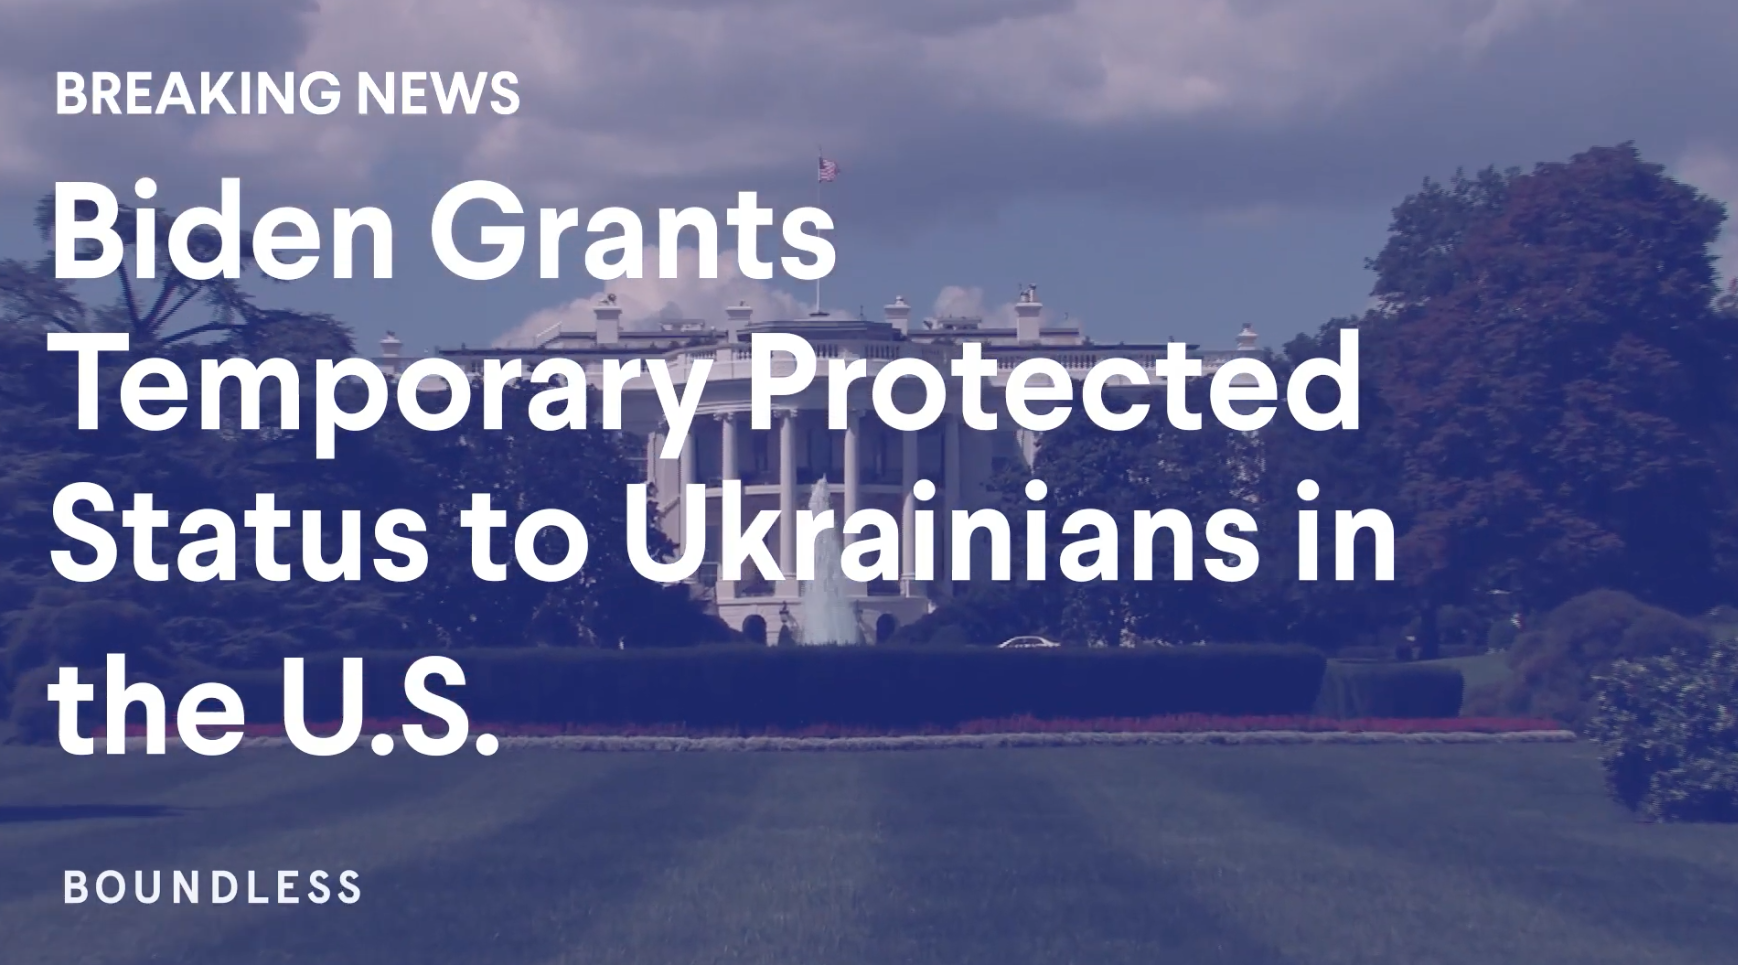 Ukraine received Temporary Protected Status (TPS)